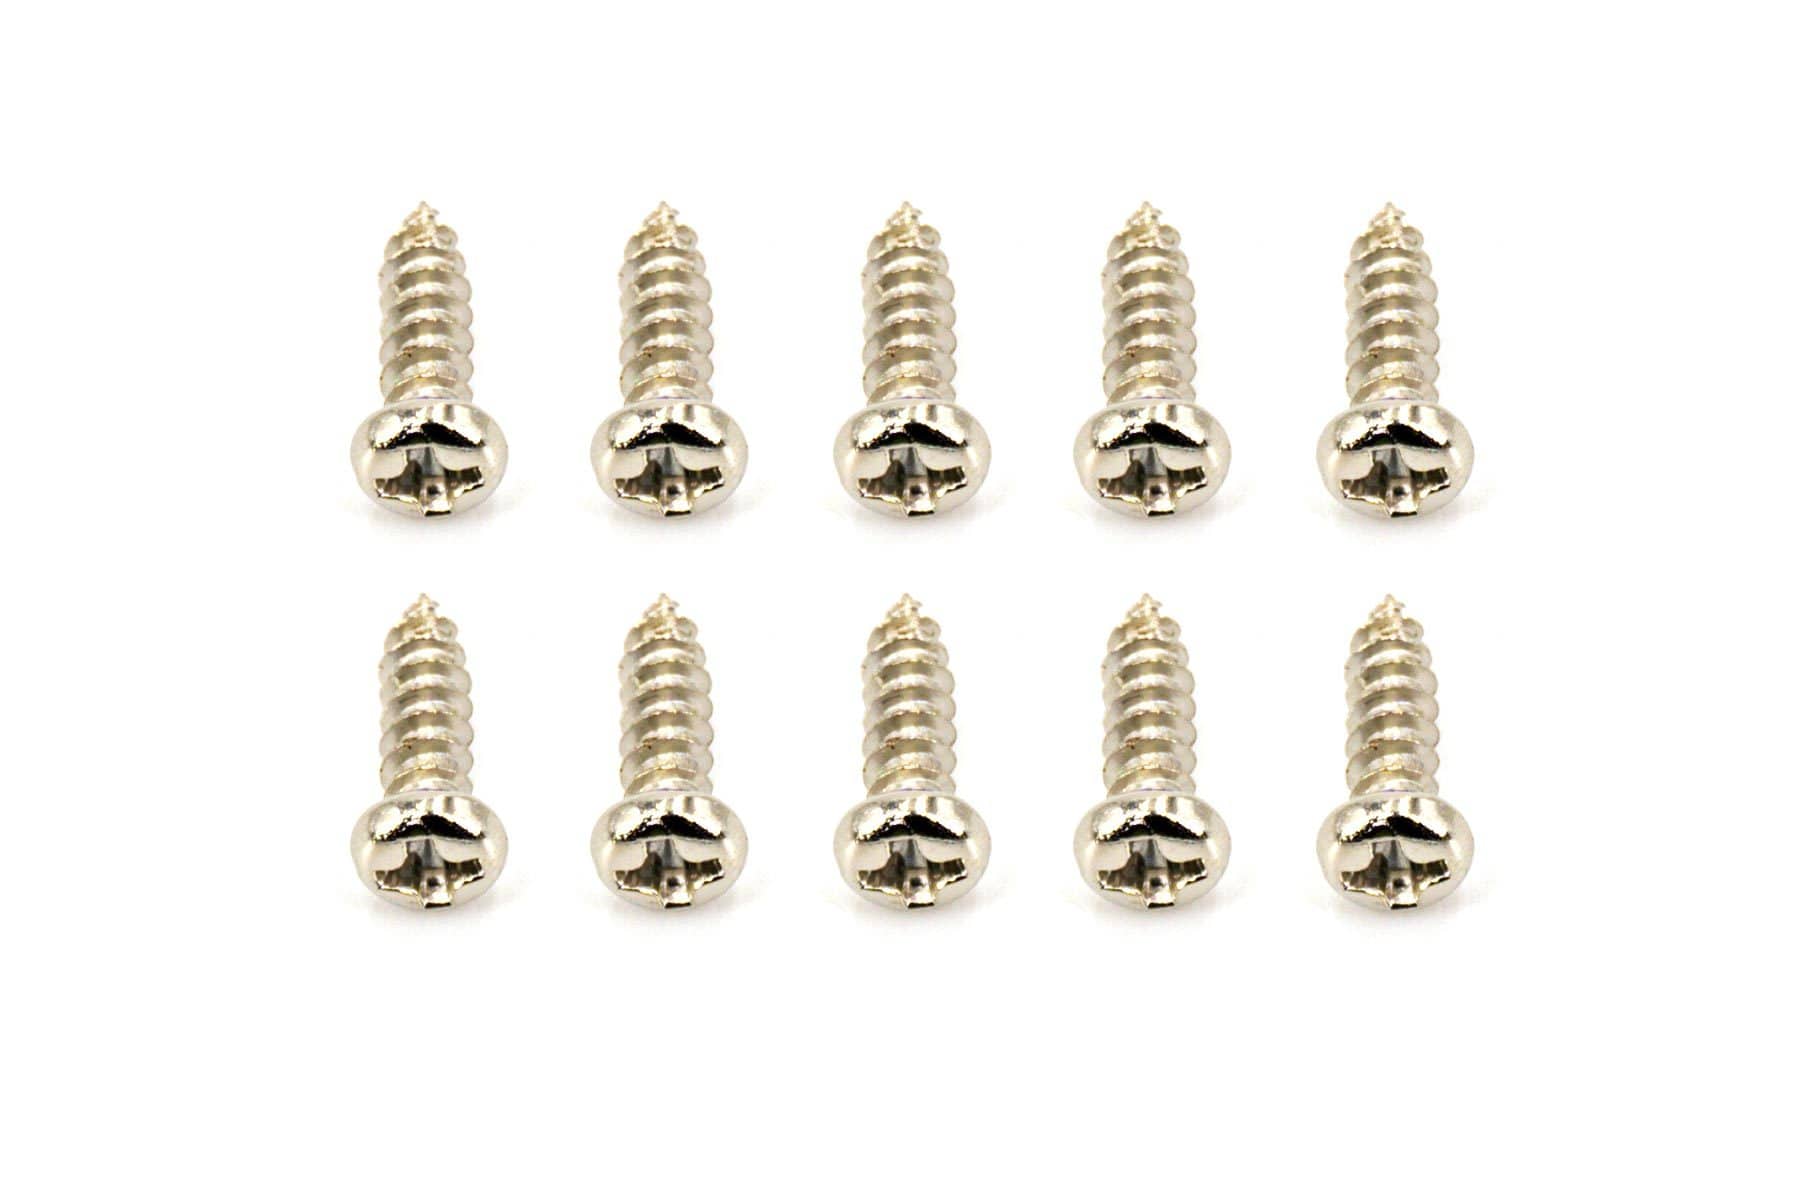 BenchCraft 3mm x 10mm Self-Tapping Screws (10 Pack)